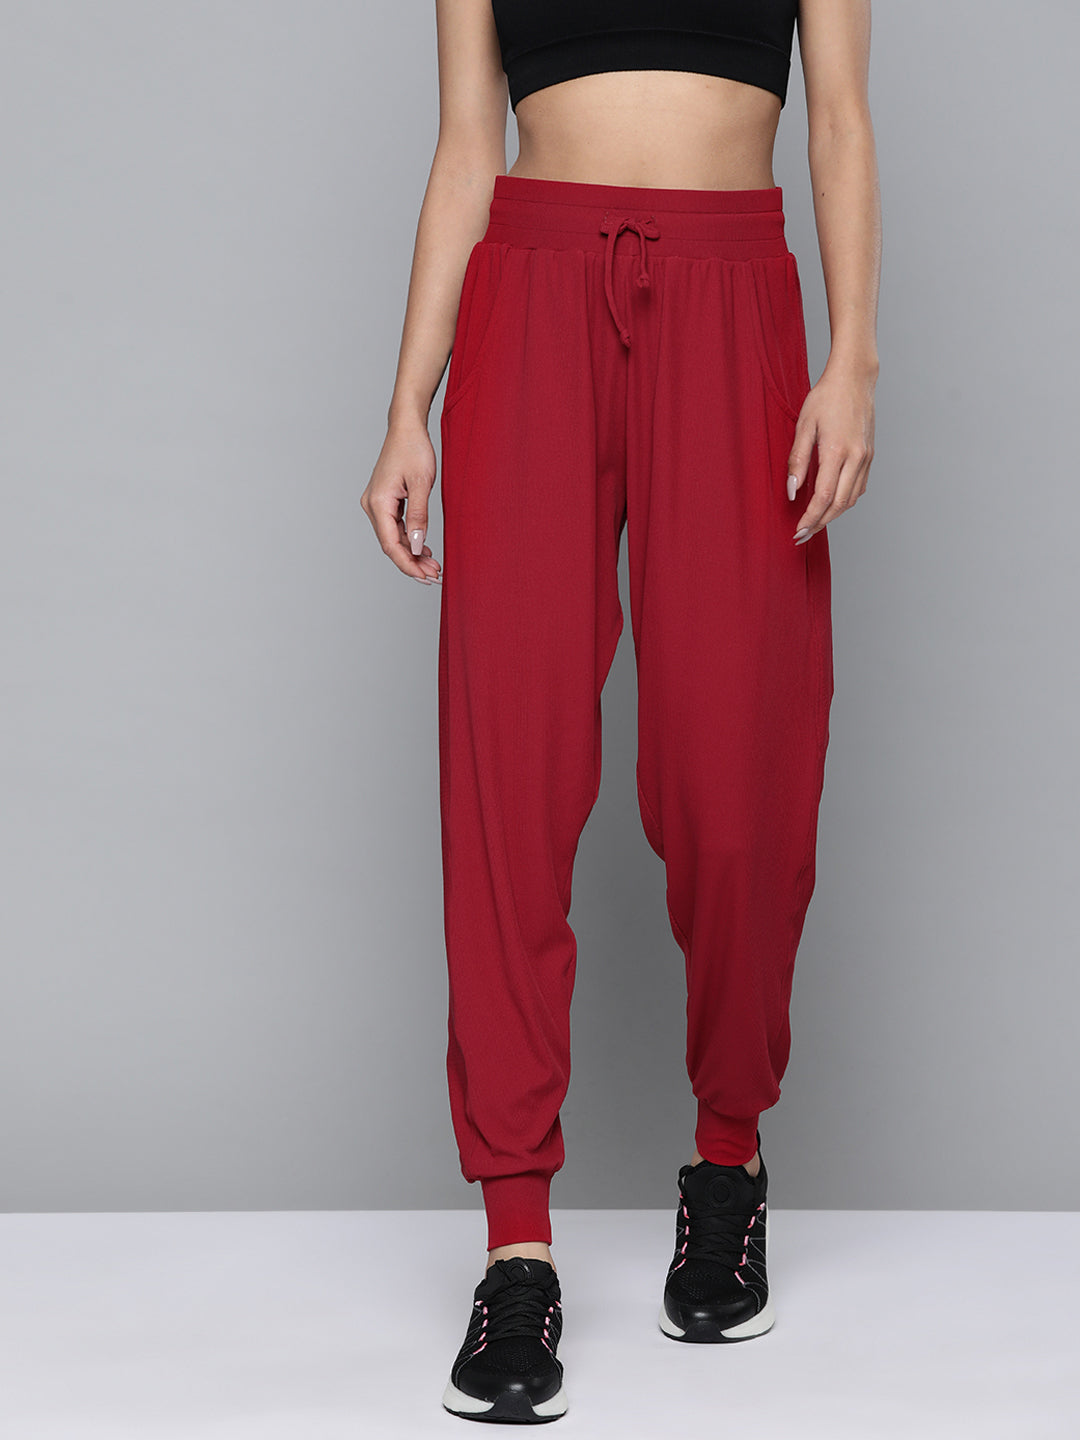 Women's Maroon Solid Relaxed Fit Dry Fit Gym Joggers